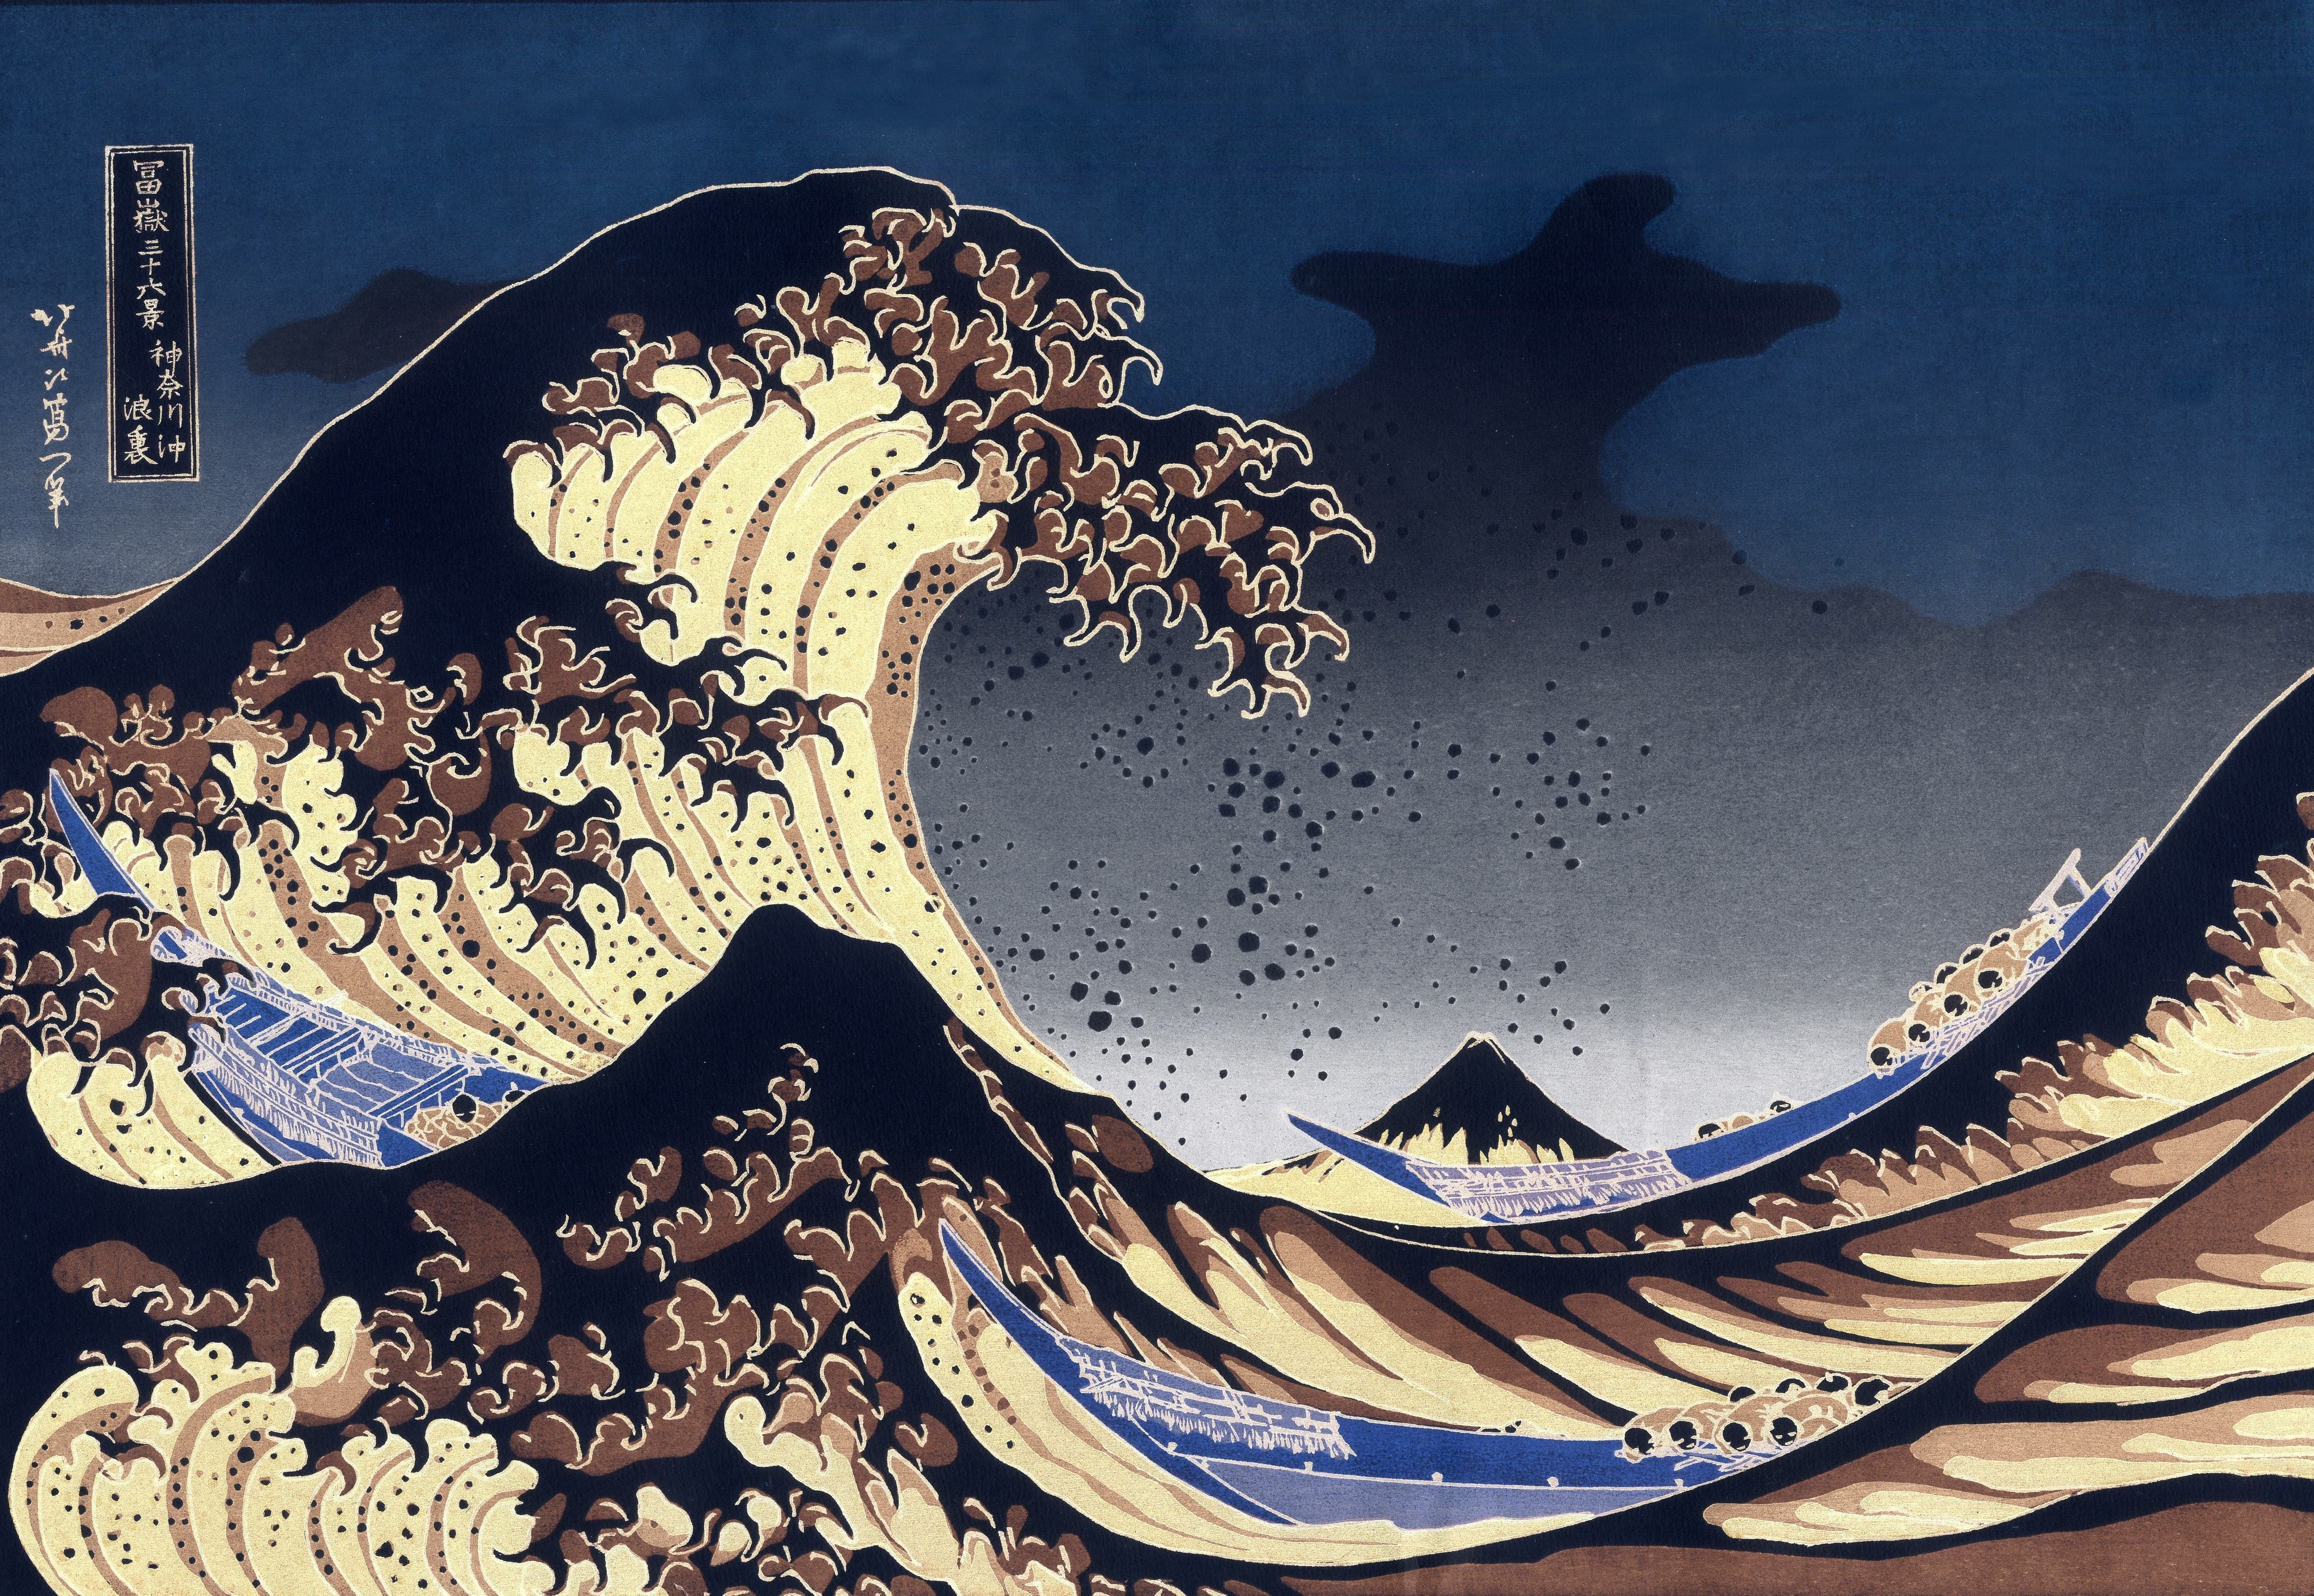 Japan, paintings, waves, boats, vehicles, The Great Wave